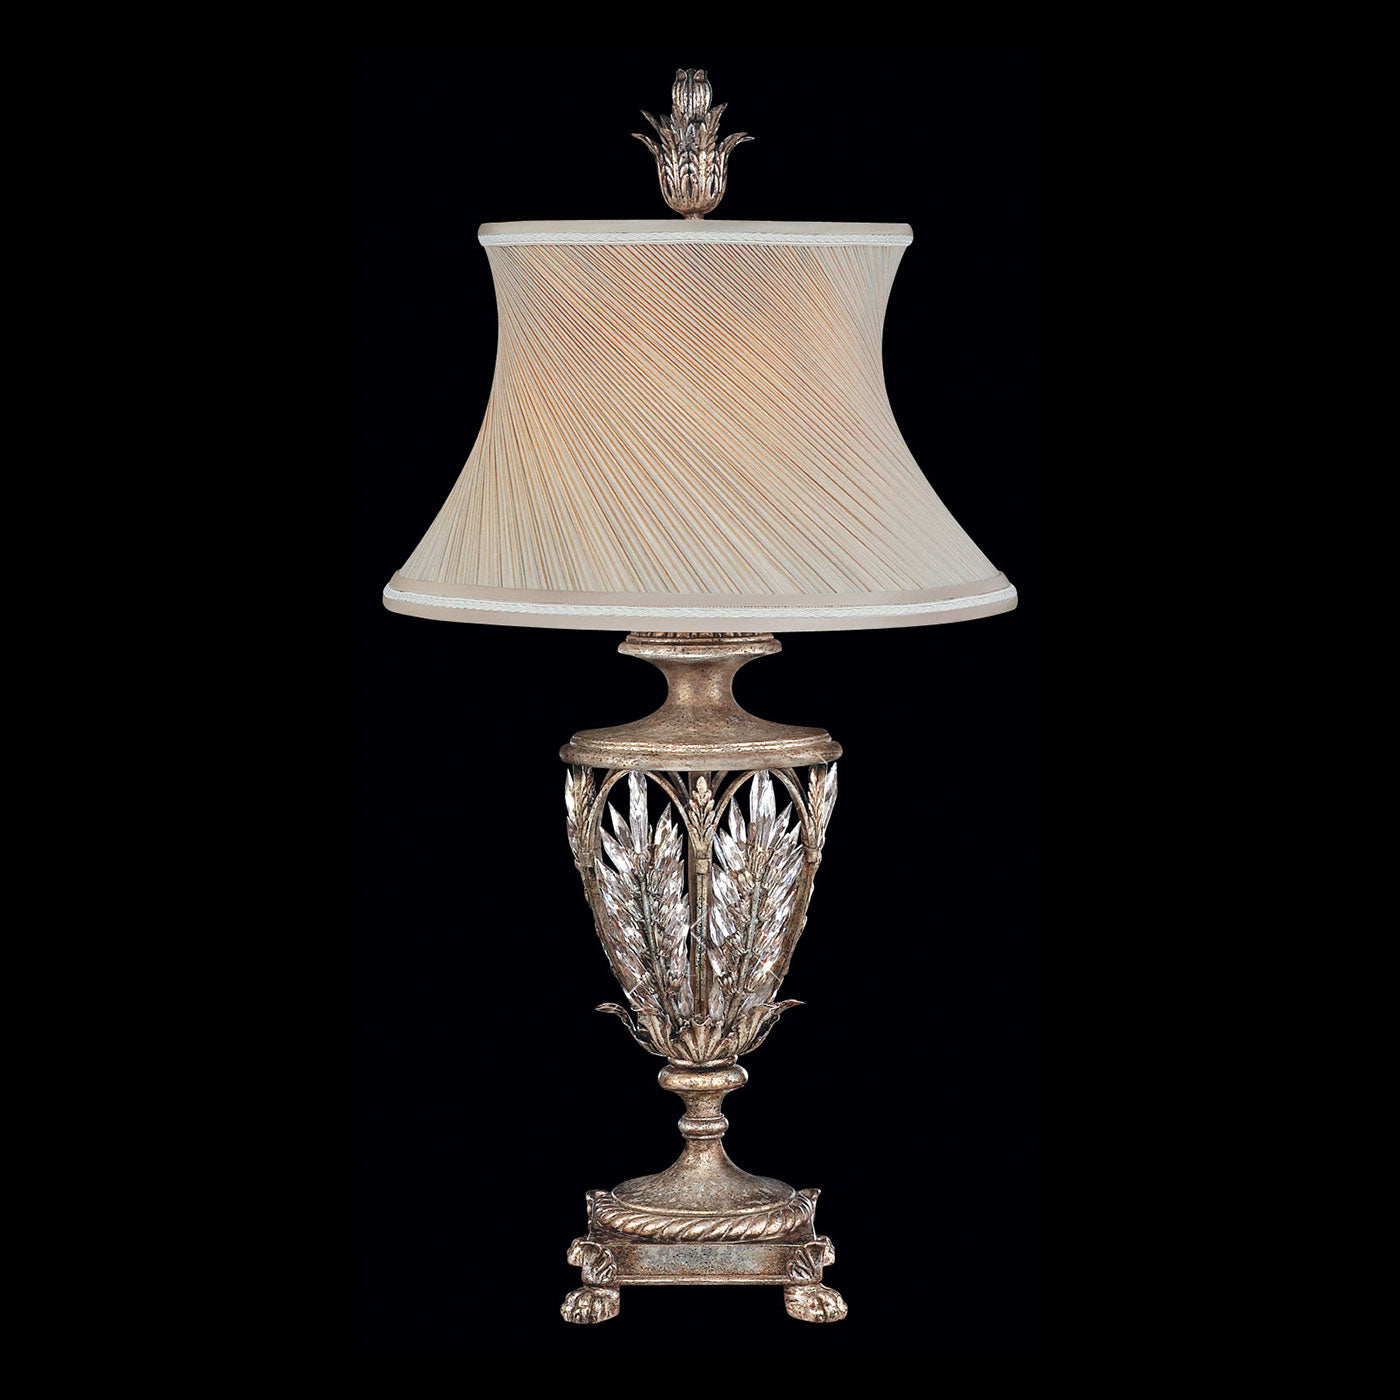 Fine Art Winter Palace 33" Table Lamp Lamp Fine Art Handcrafted Lighting Silver  